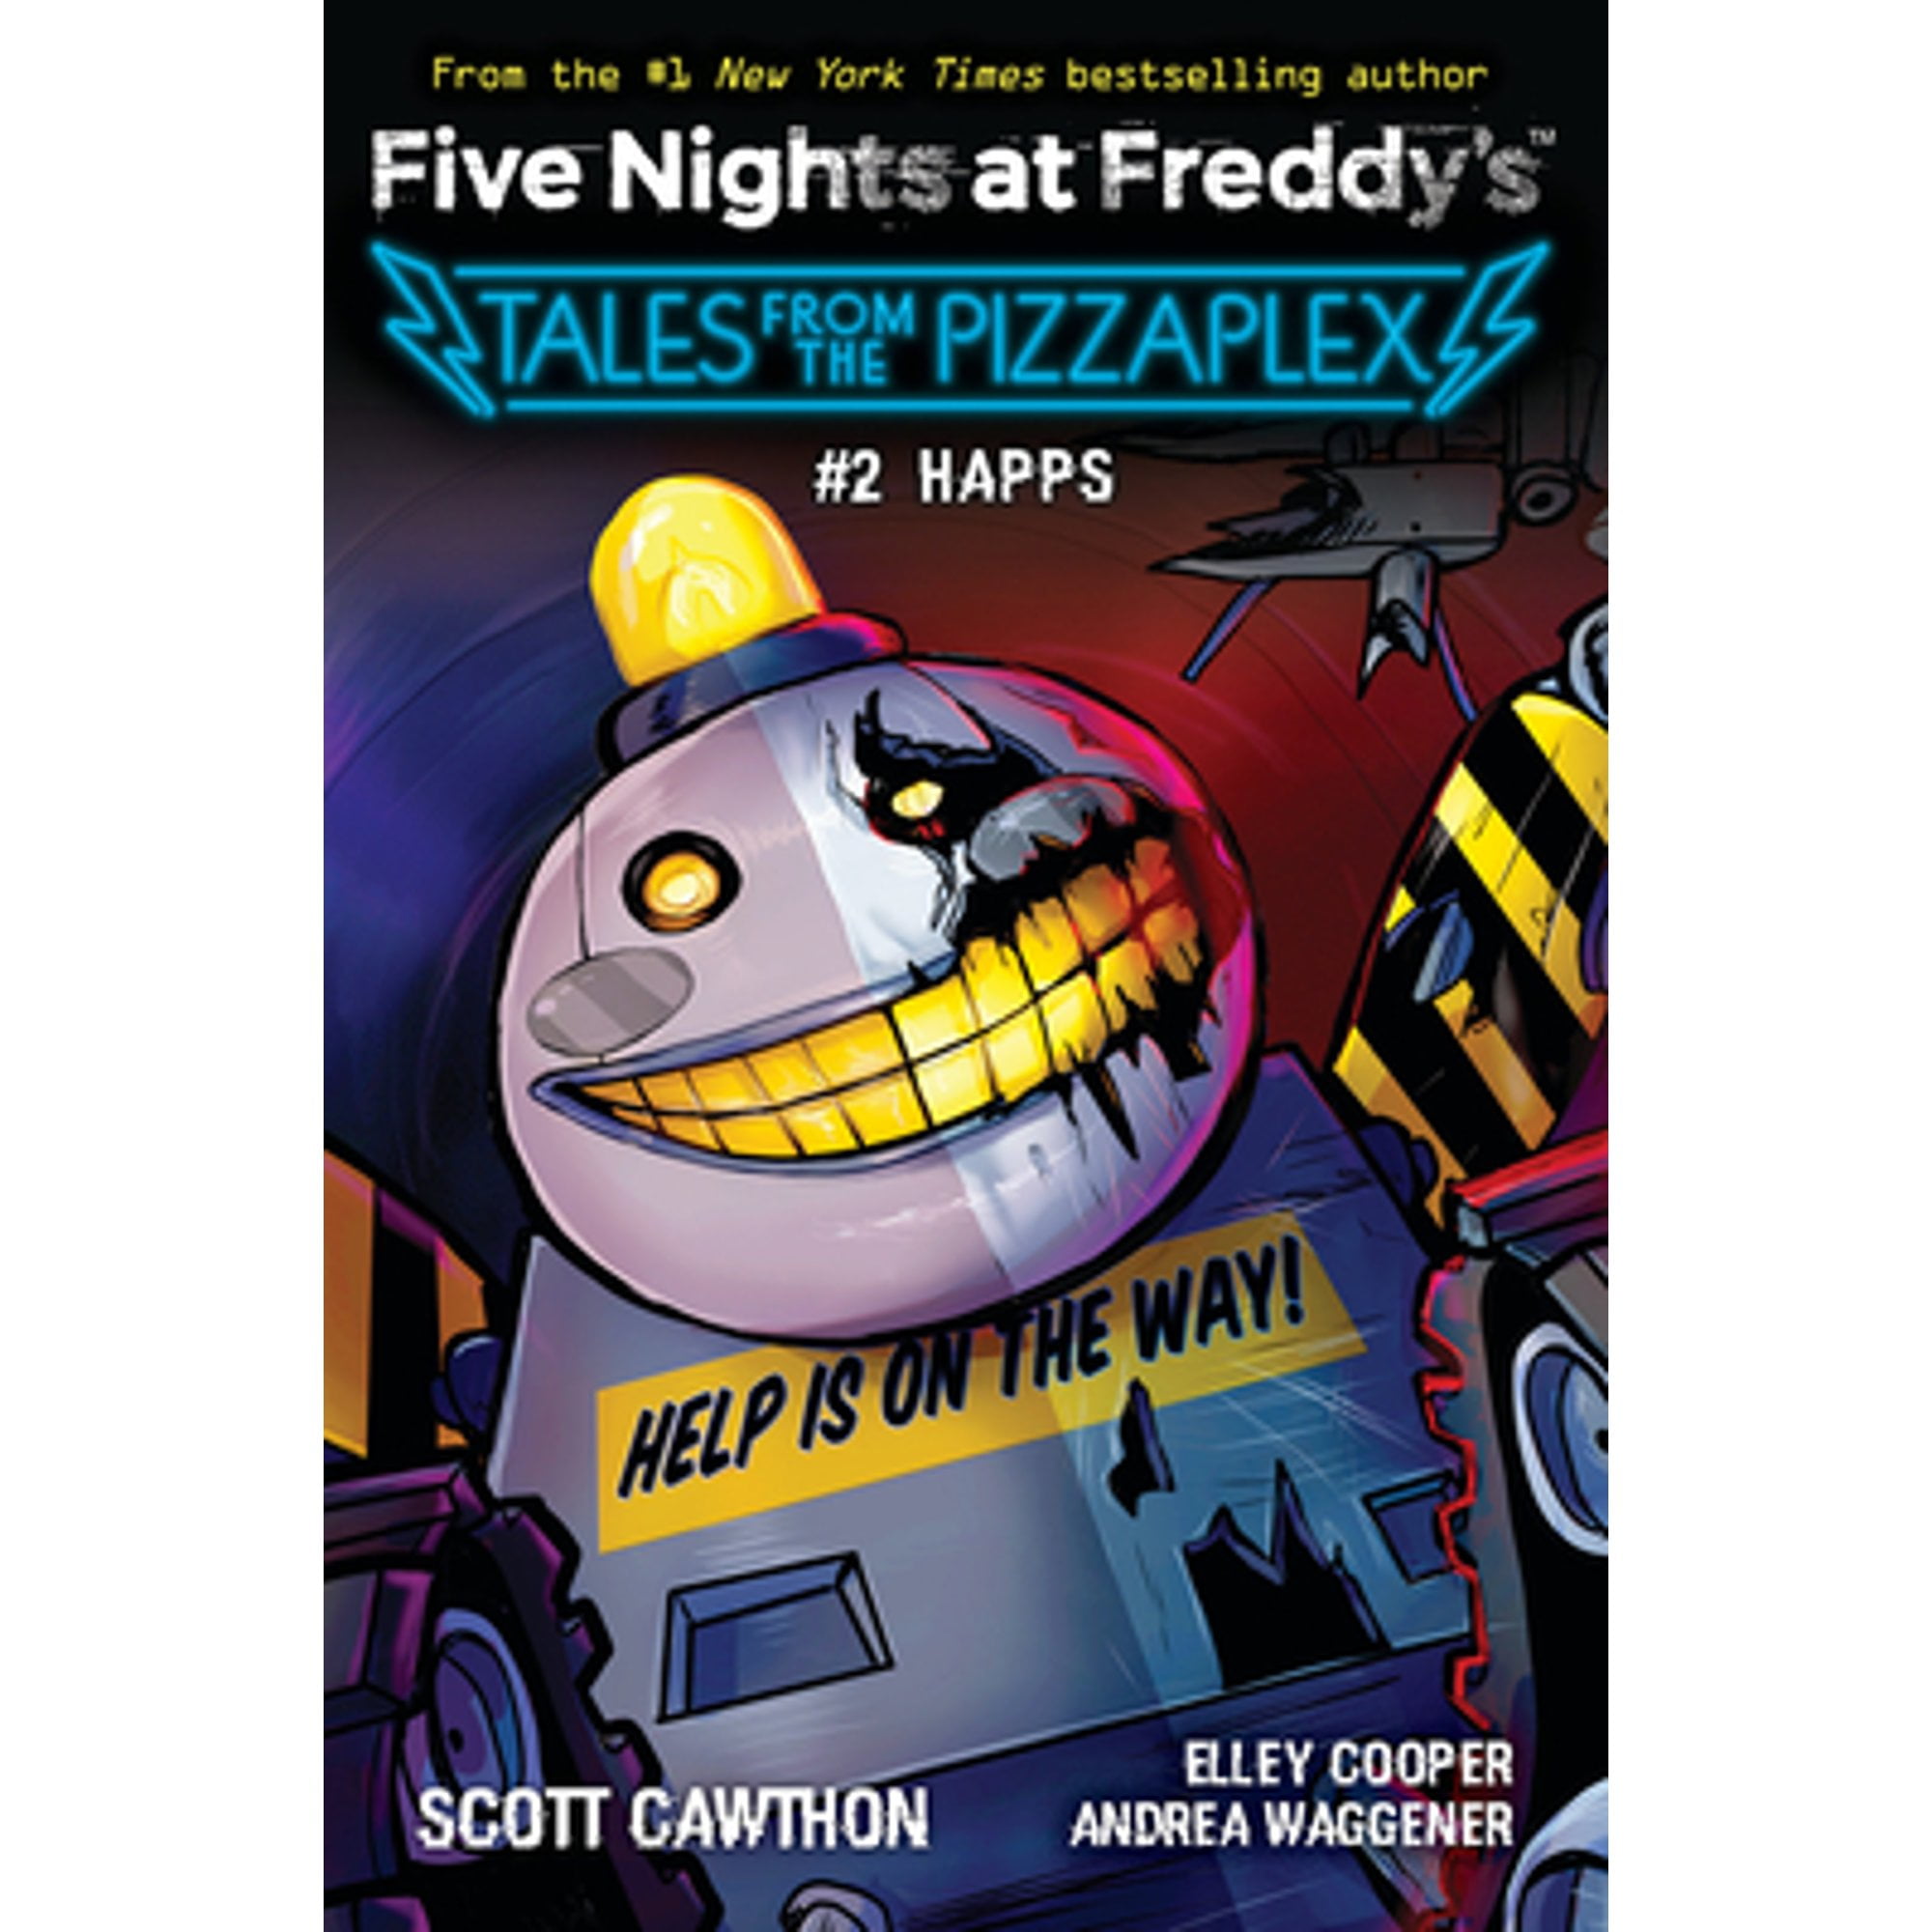 Pre-Owned HAPPS: An AFK Book Five Nights at Freddys: Tales from the Pizzaplex 2 Paperback Scott Cawthon, Elley Cooper, Andrea Waggener